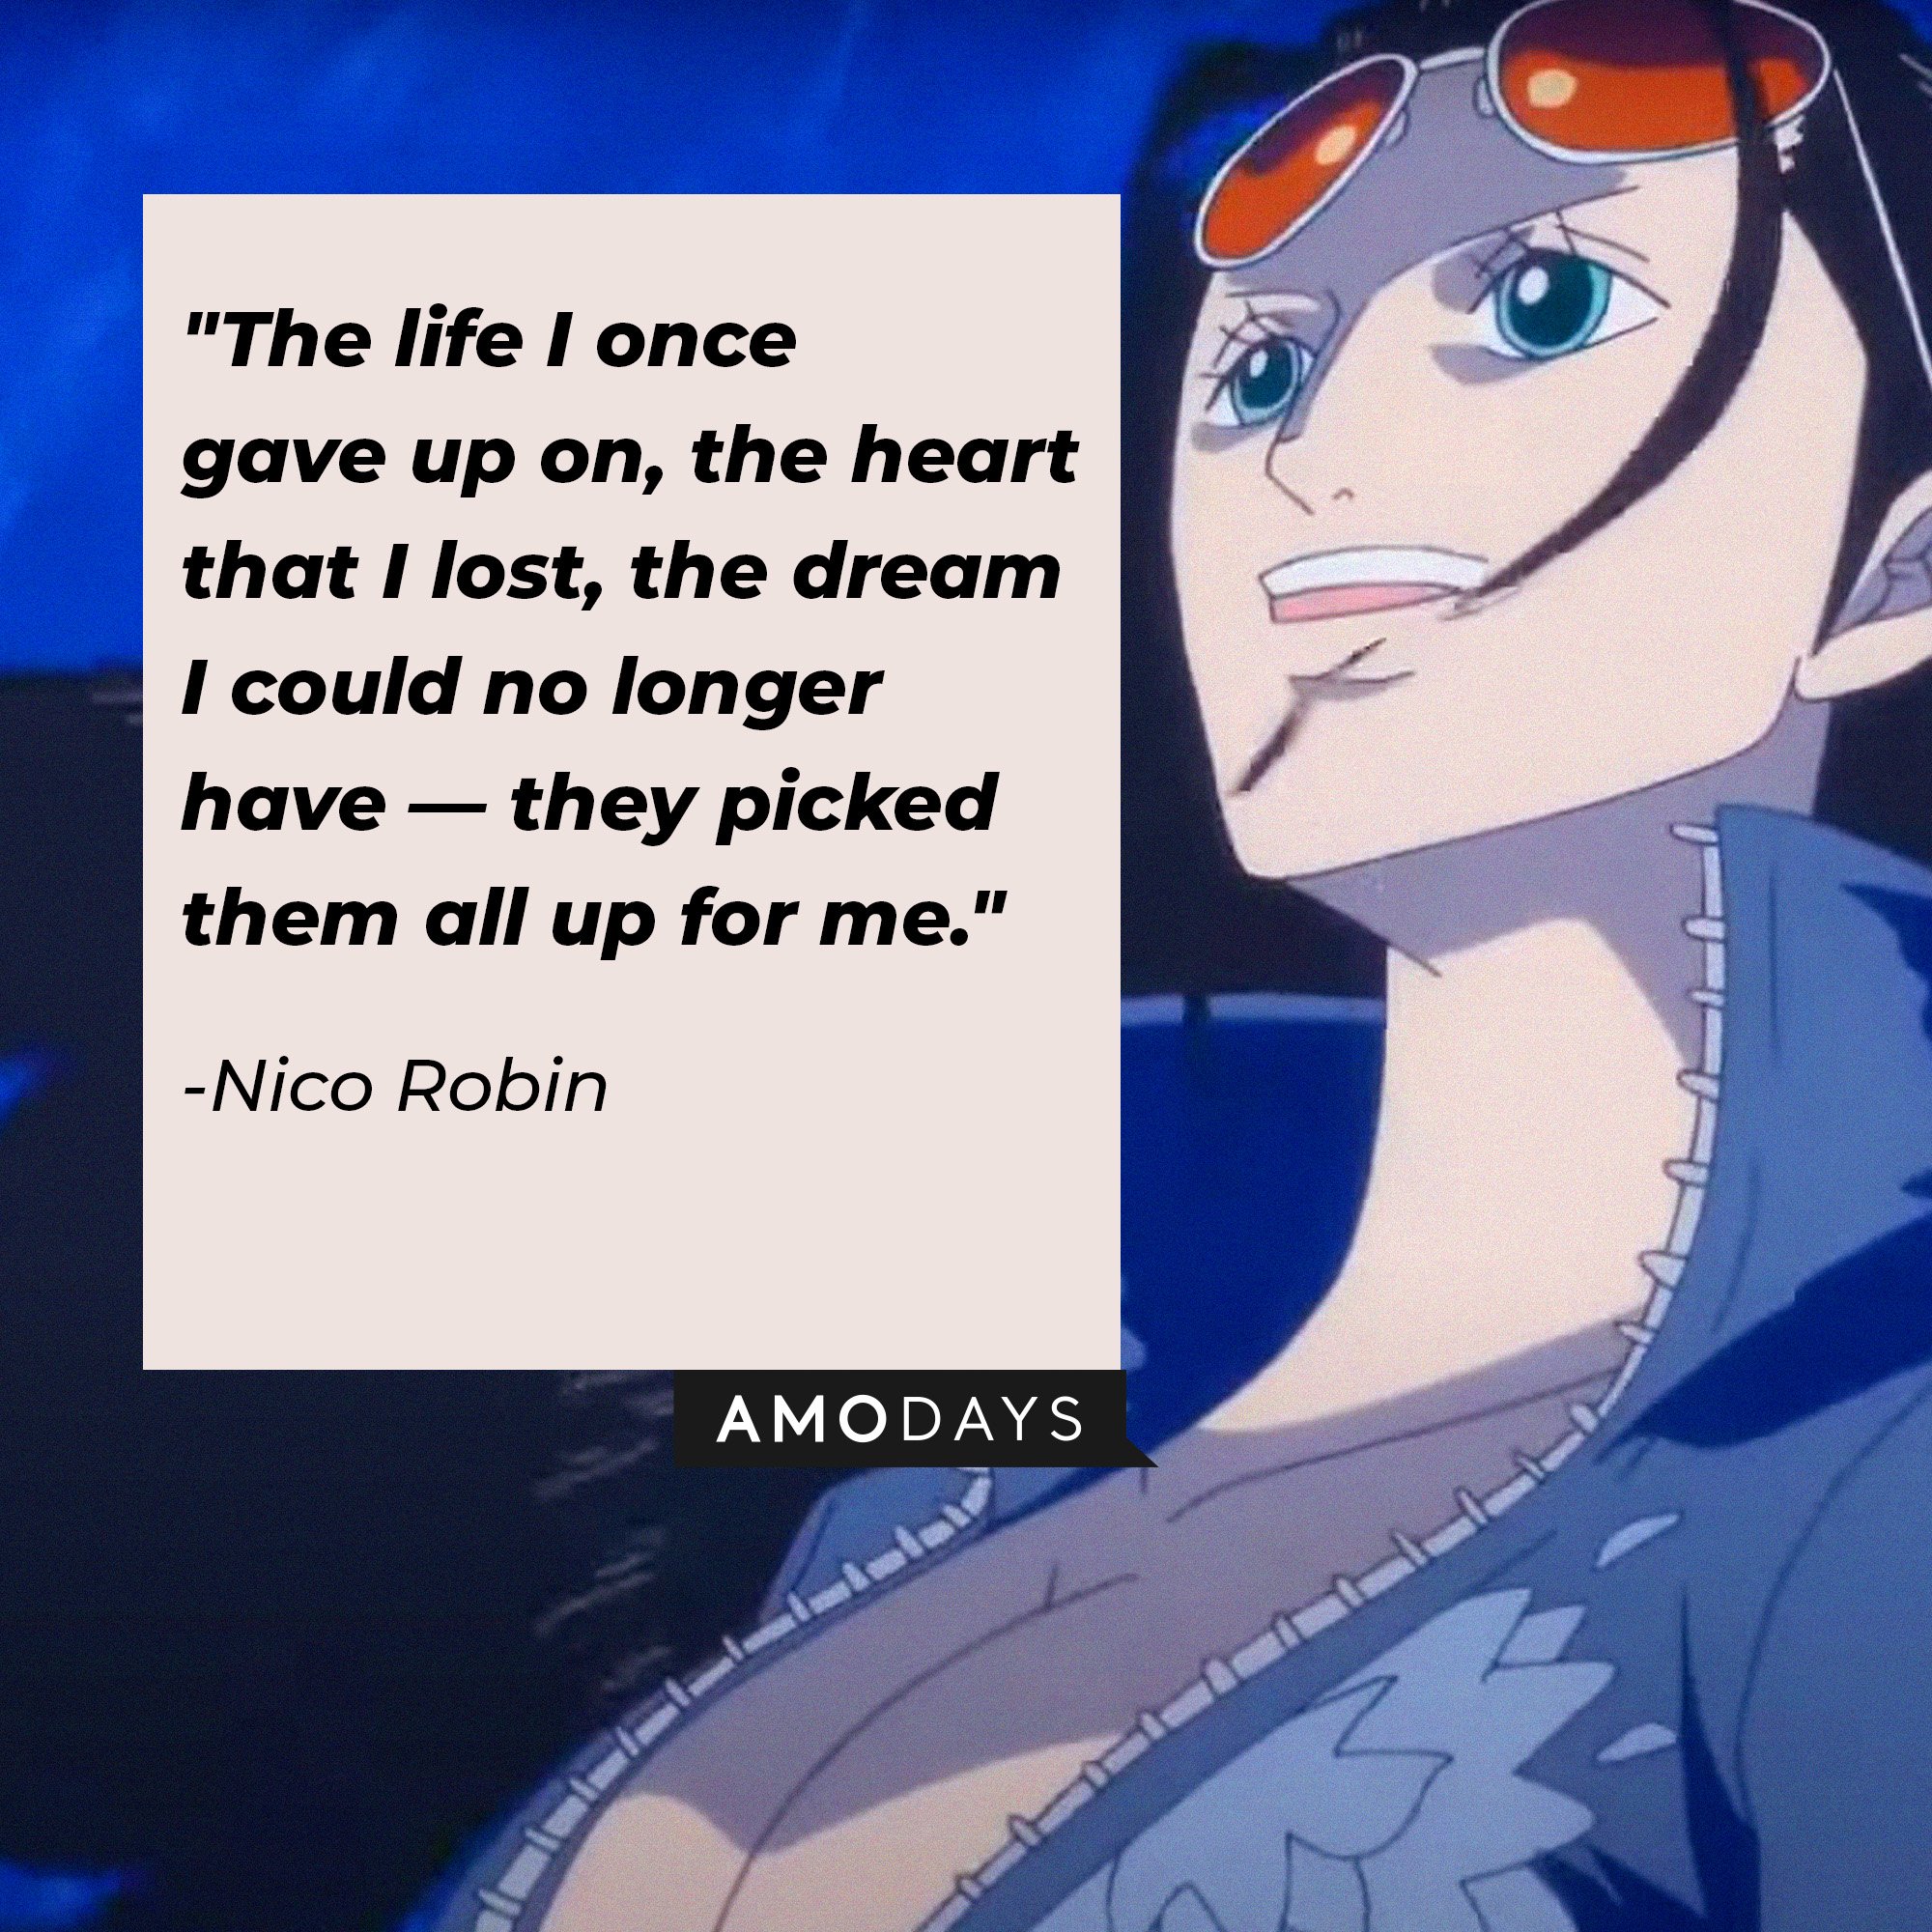 Nico Robin’s quote: "The life I once gave up on, the heart that I lost, the dream I could no longer have — they picked them all up for me." | Image: AmoDays